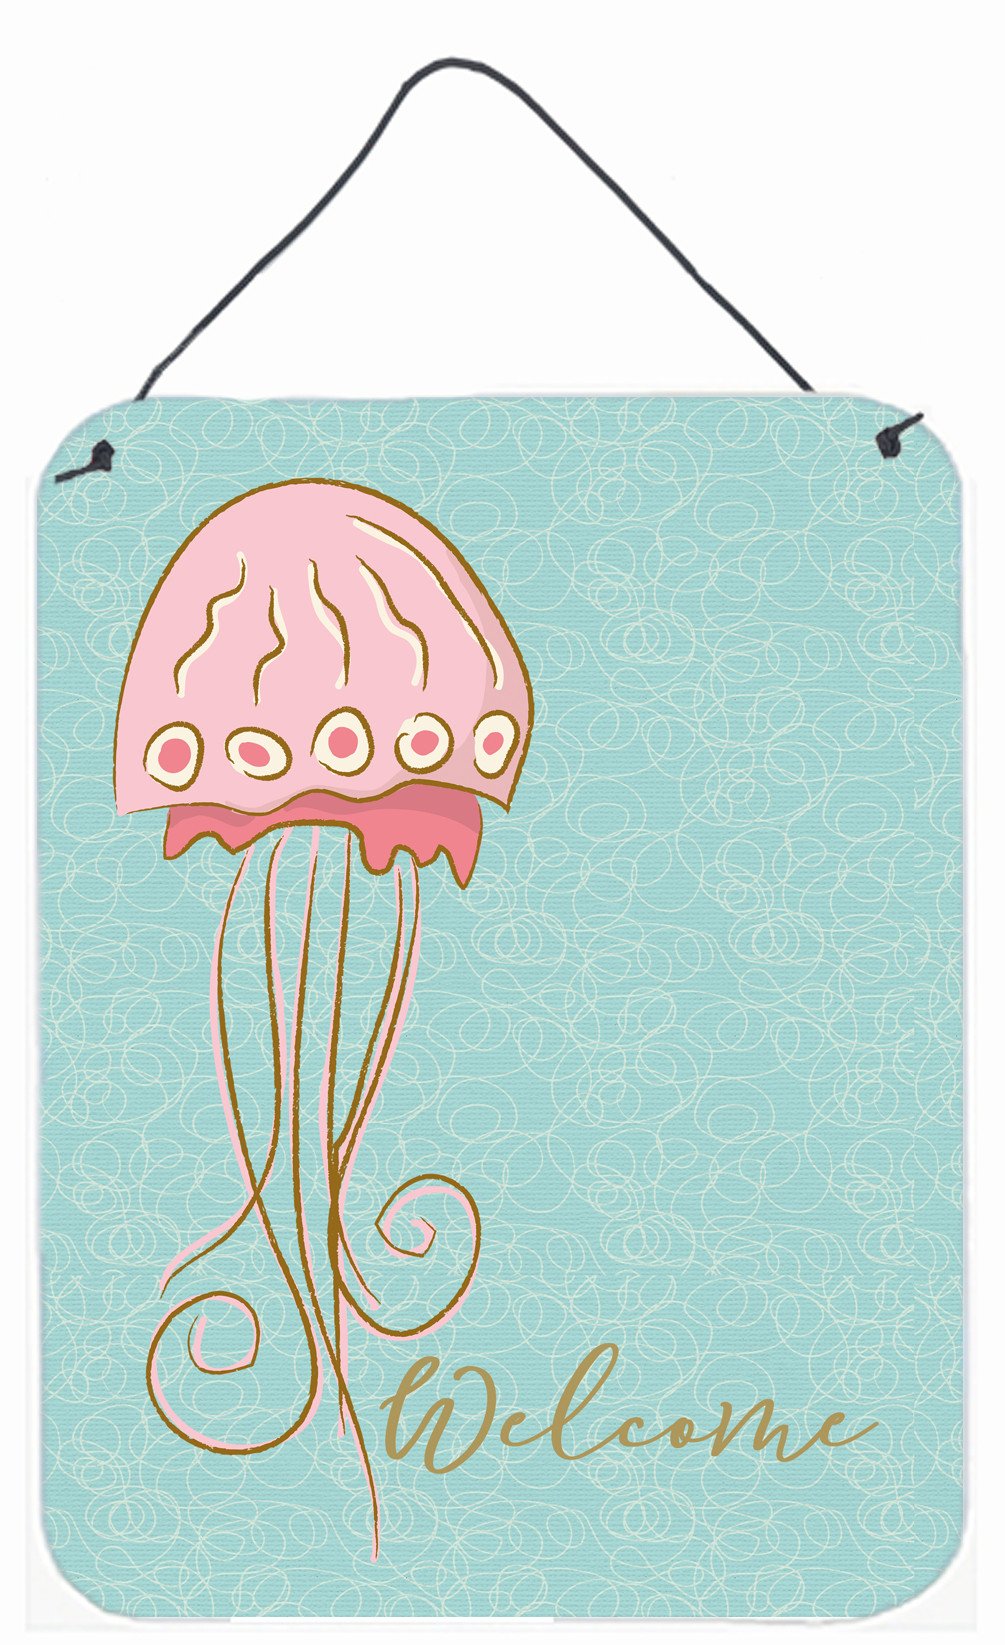 Jelly Fish Welcome Wall or Door Hanging Prints BB8576DS1216 by Caroline's Treasures